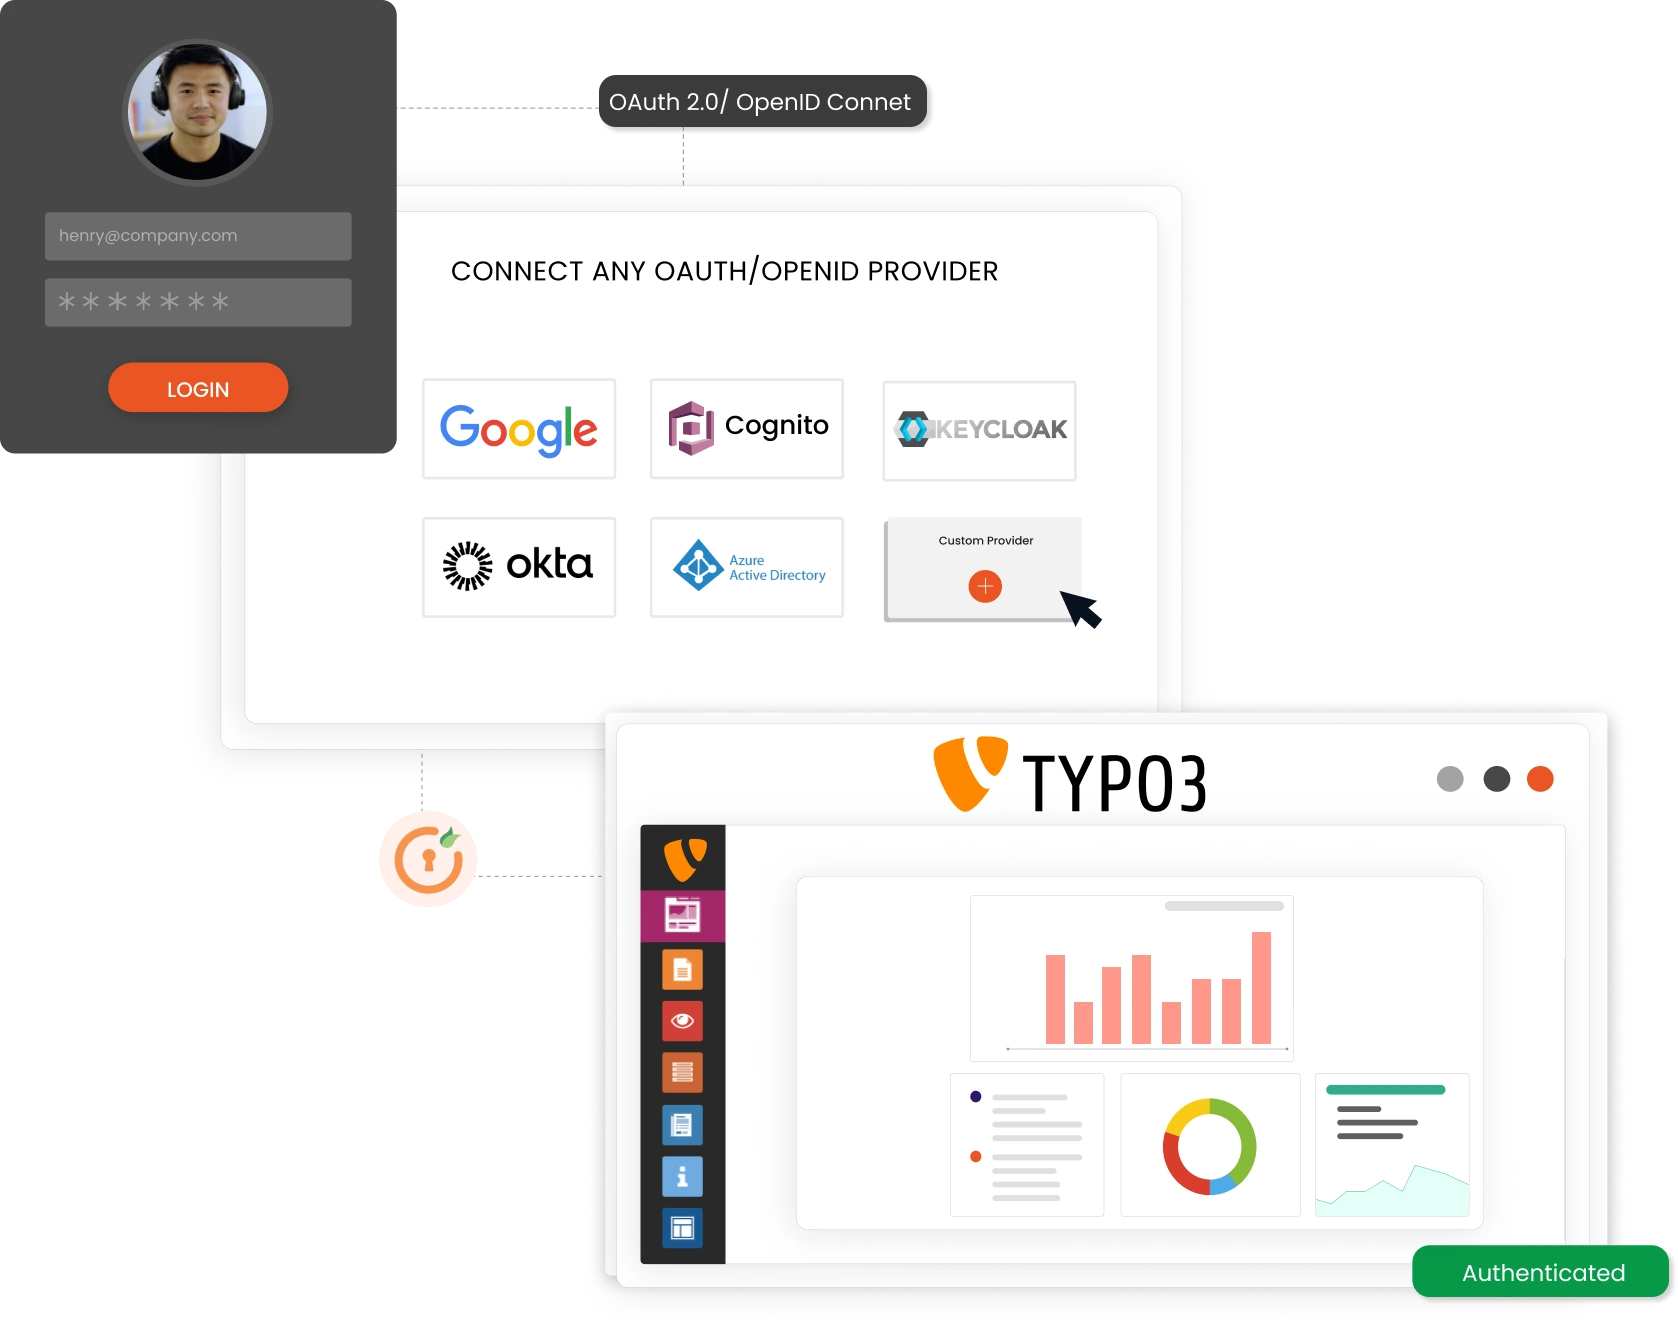 Typo3 OAuth 2.0 / OpenID Connect Single Sign On (SSO) - TYPO3 SSO - Banner